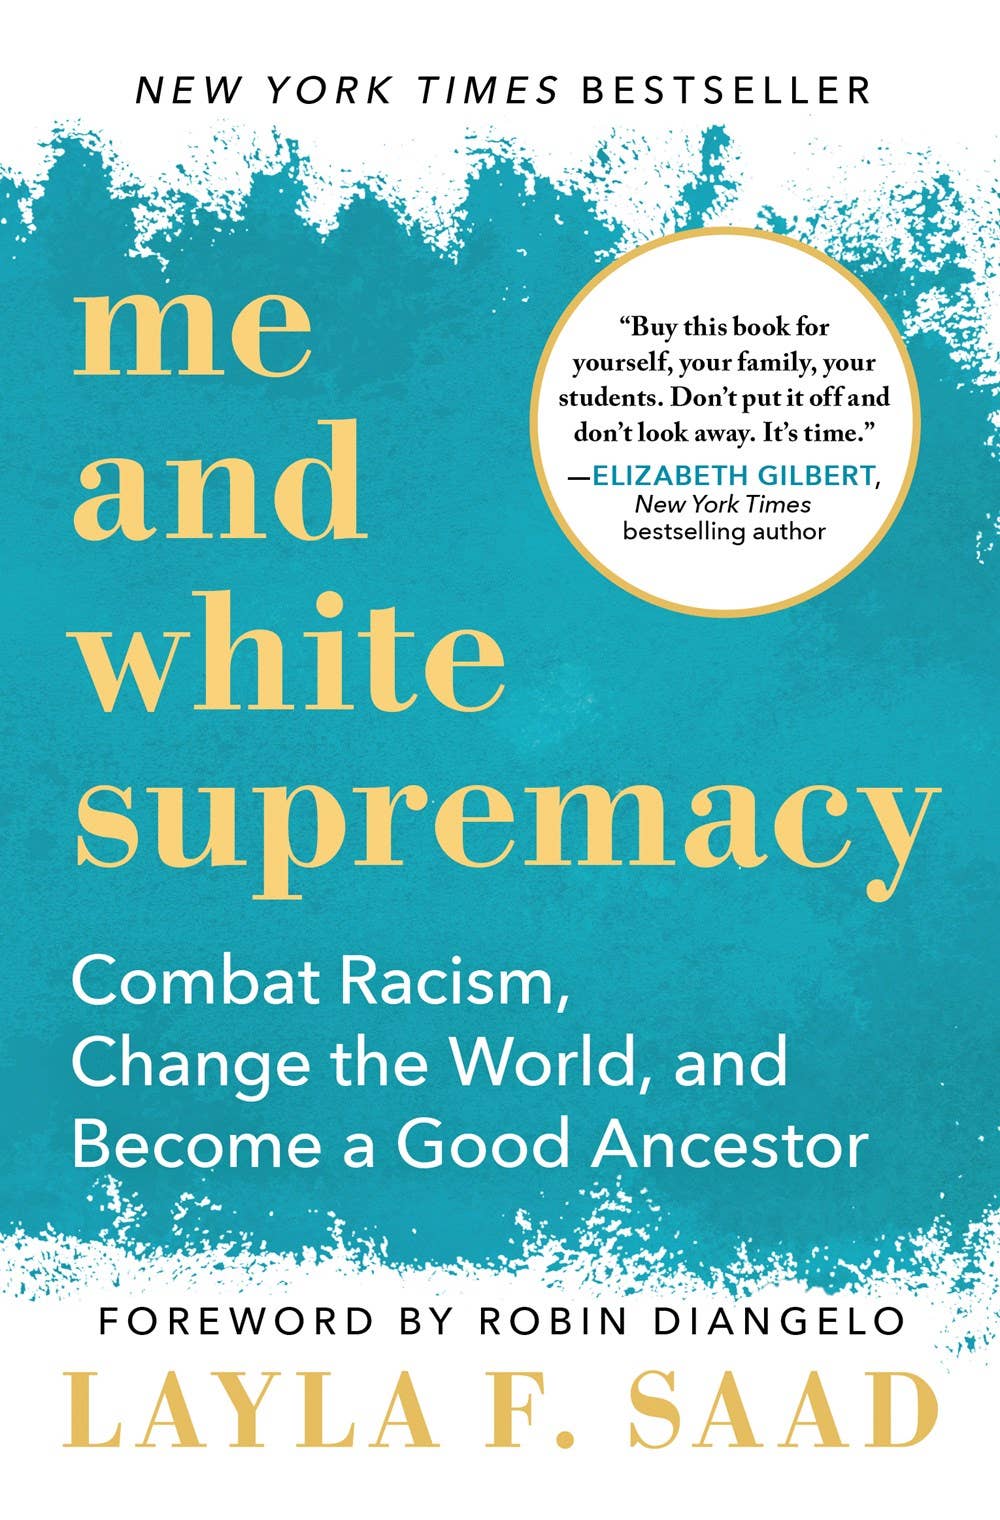 Me and White Supremacy by Layla F. Saad (Hardcover)